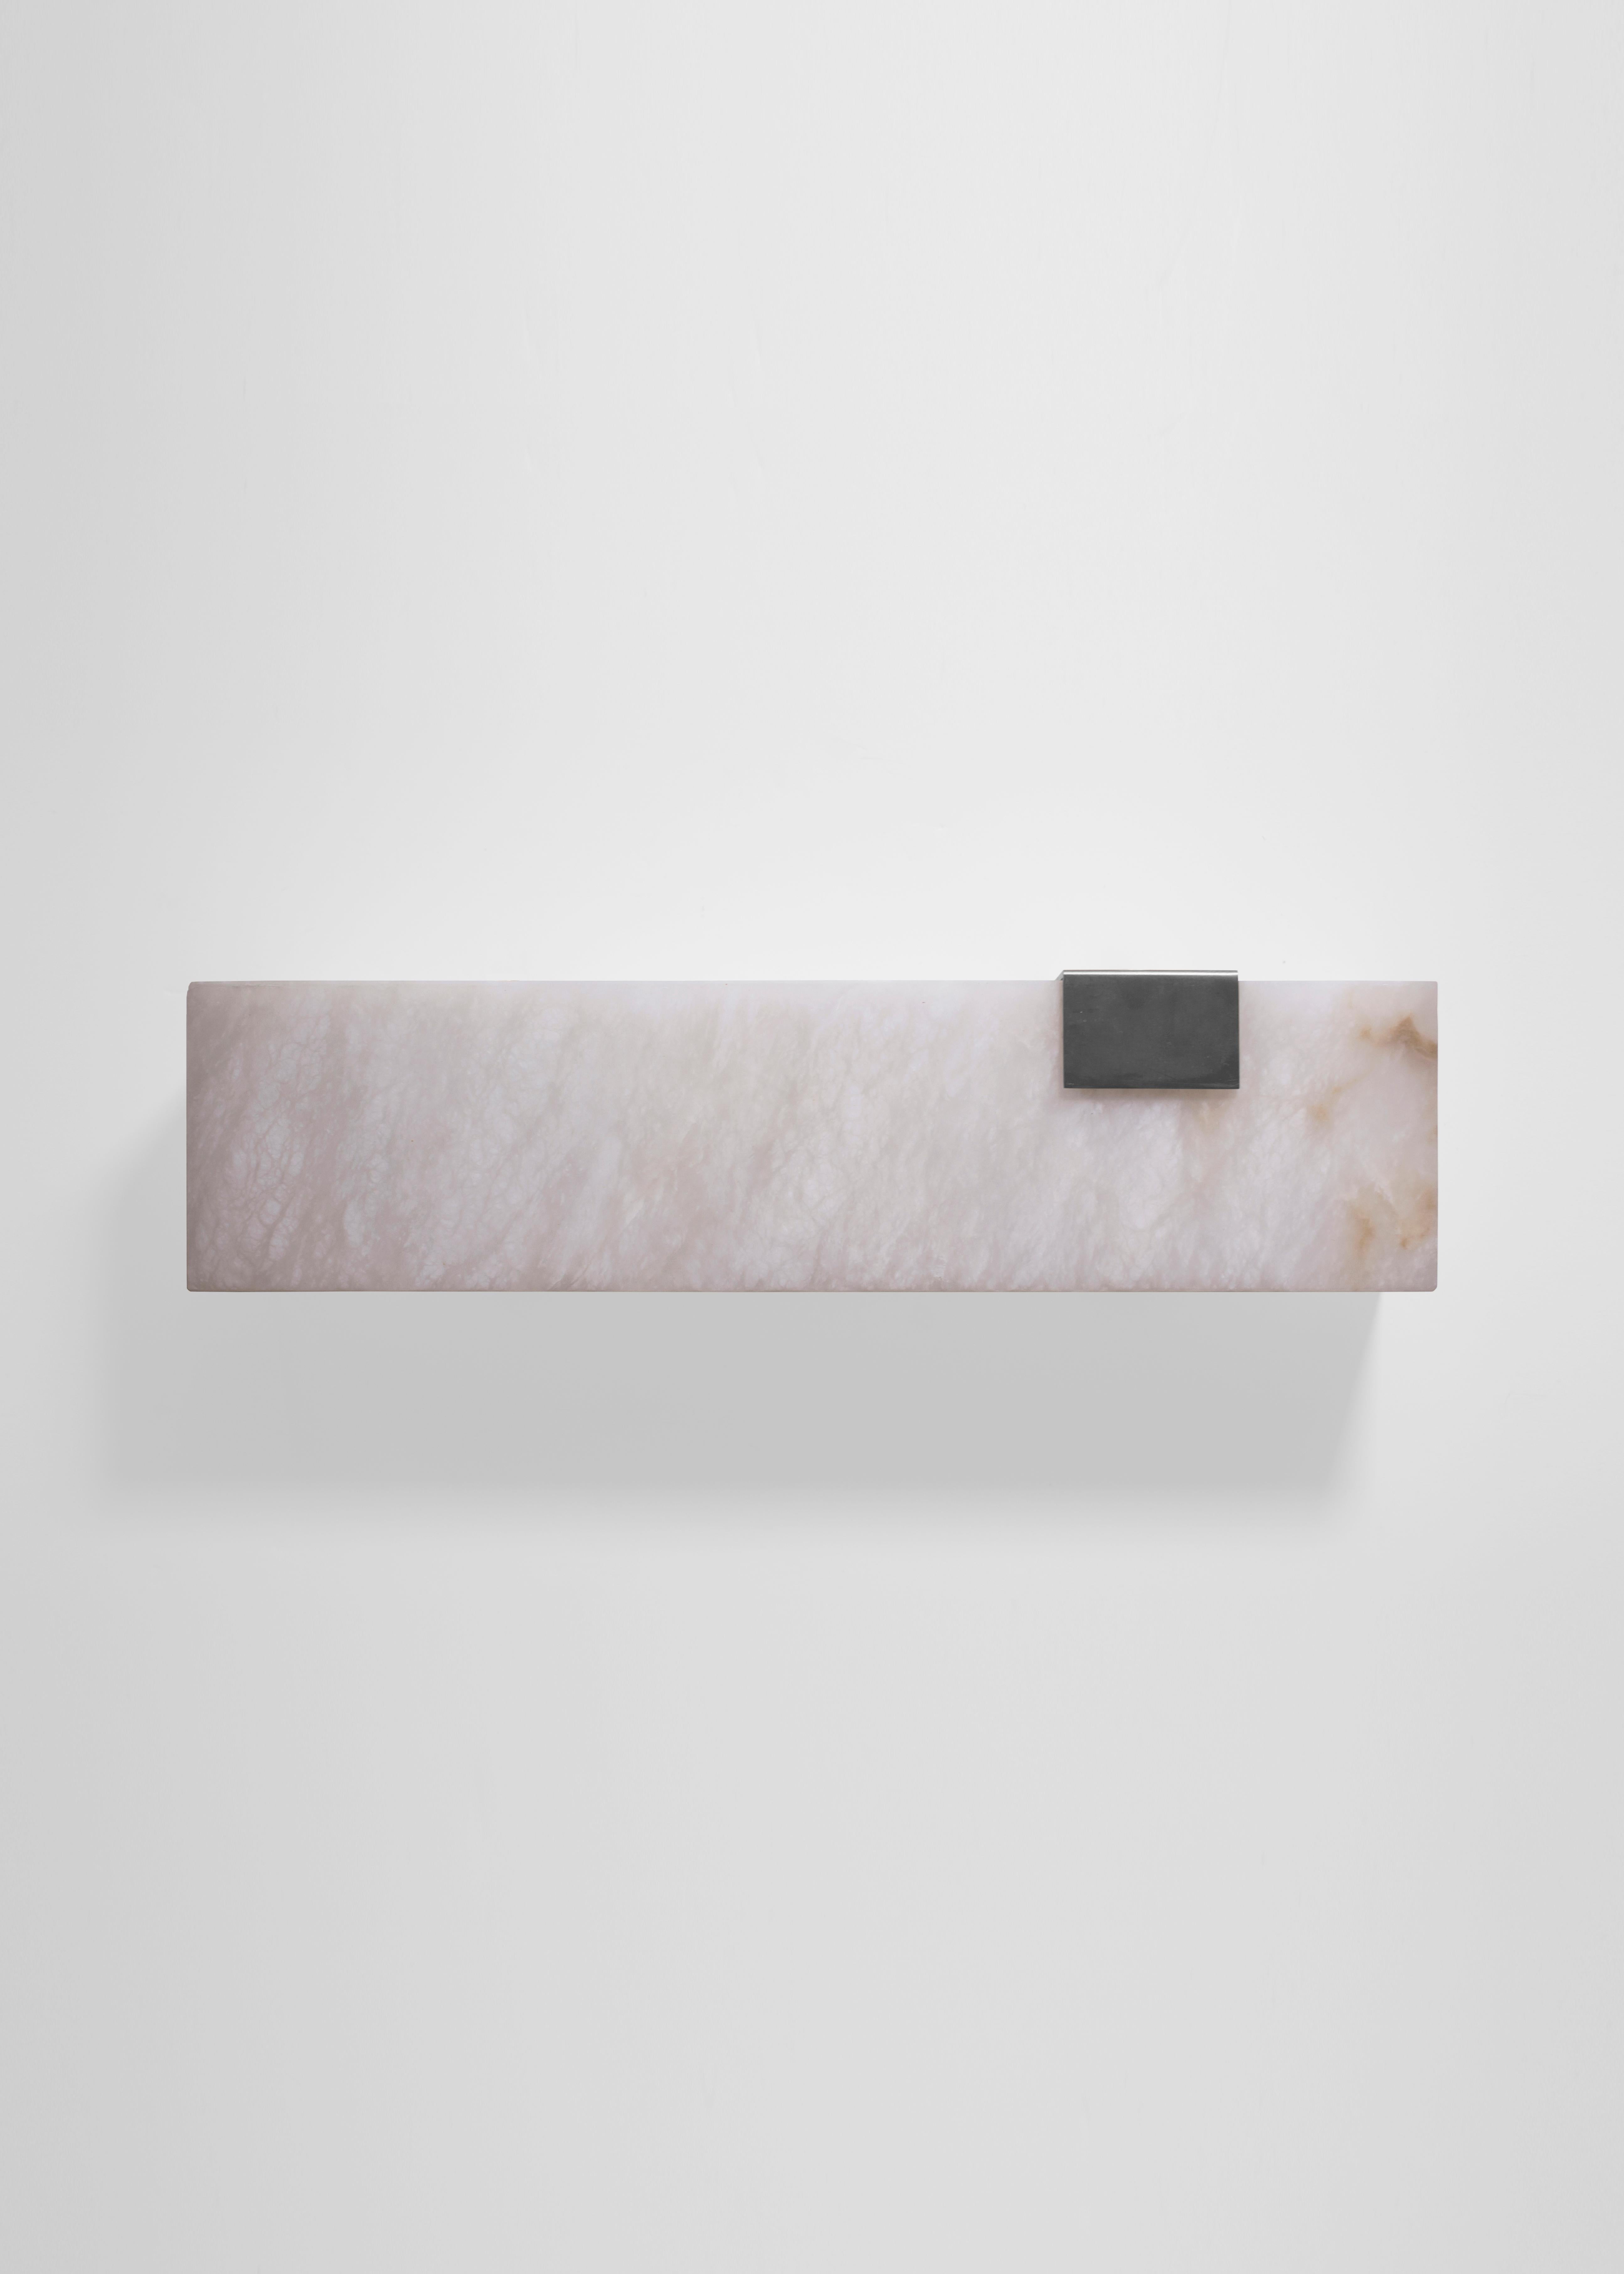 Orphan work 003-1C Sconce, 2018
Shown in brushed nickel and alabaster 
Available in brushed brass, brushed nickel and blackened brass
Measures: 5 1/4”H x 19”W x 3 7/8”D
Wall or ceiling mount
Vertical or horizontal
Plug-in by request
1-4 adjustable